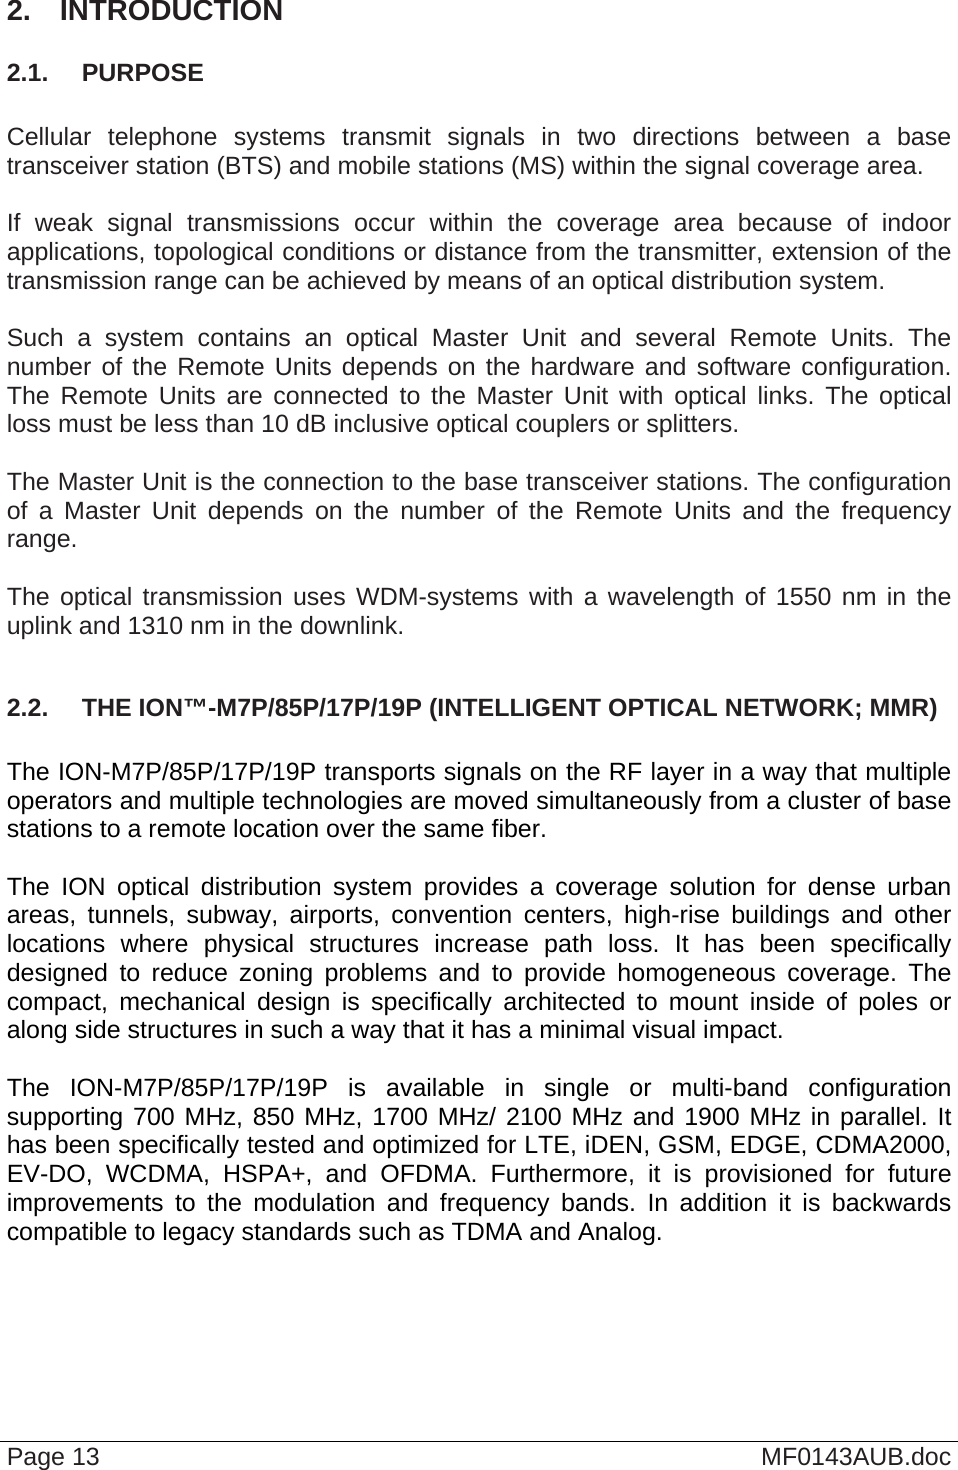  Page 13  MF0143AUB.doc 2.  INTRODUCTION 2.1.  PURPOSE  Cellular telephone systems transmit signals in two directions between a base transceiver station (BTS) and mobile stations (MS) within the signal coverage area.  If weak signal transmissions occur within the coverage area because of indoor applications, topological conditions or distance from the transmitter, extension of the transmission range can be achieved by means of an optical distribution system.  Such a system contains an optical Master Unit and several Remote Units. The number of the Remote Units depends on the hardware and software configuration. The Remote Units are connected to the Master Unit with optical links. The optical loss must be less than 10 dB inclusive optical couplers or splitters.  The Master Unit is the connection to the base transceiver stations. The configuration of a Master Unit depends on the number of the Remote Units and the frequency range.   The optical transmission uses WDM-systems with a wavelength of 1550 nm in the uplink and 1310 nm in the downlink.  2.2.  THE ION™-M7P/85P/17P/19P (INTELLIGENT OPTICAL NETWORK; MMR)  The ION-M7P/85P/17P/19P transports signals on the RF layer in a way that multiple operators and multiple technologies are moved simultaneously from a cluster of base stations to a remote location over the same fiber.  The ION optical distribution system provides a coverage solution for dense urban areas, tunnels, subway, airports, convention centers, high-rise buildings and other locations where physical structures increase path loss. It has been specifically designed to reduce zoning problems and to provide homogeneous coverage. The compact, mechanical design is specifically architected to mount inside of poles or along side structures in such a way that it has a minimal visual impact.  The ION-M7P/85P/17P/19P is available in single or multi-band configuration supporting 700 MHz, 850 MHz, 1700 MHz/ 2100 MHz and 1900 MHz in parallel. It has been specifically tested and optimized for LTE, iDEN, GSM, EDGE, CDMA2000, EV-DO, WCDMA, HSPA+, and OFDMA. Furthermore, it is provisioned for future improvements to the modulation and frequency bands. In addition it is backwards compatible to legacy standards such as TDMA and Analog.   